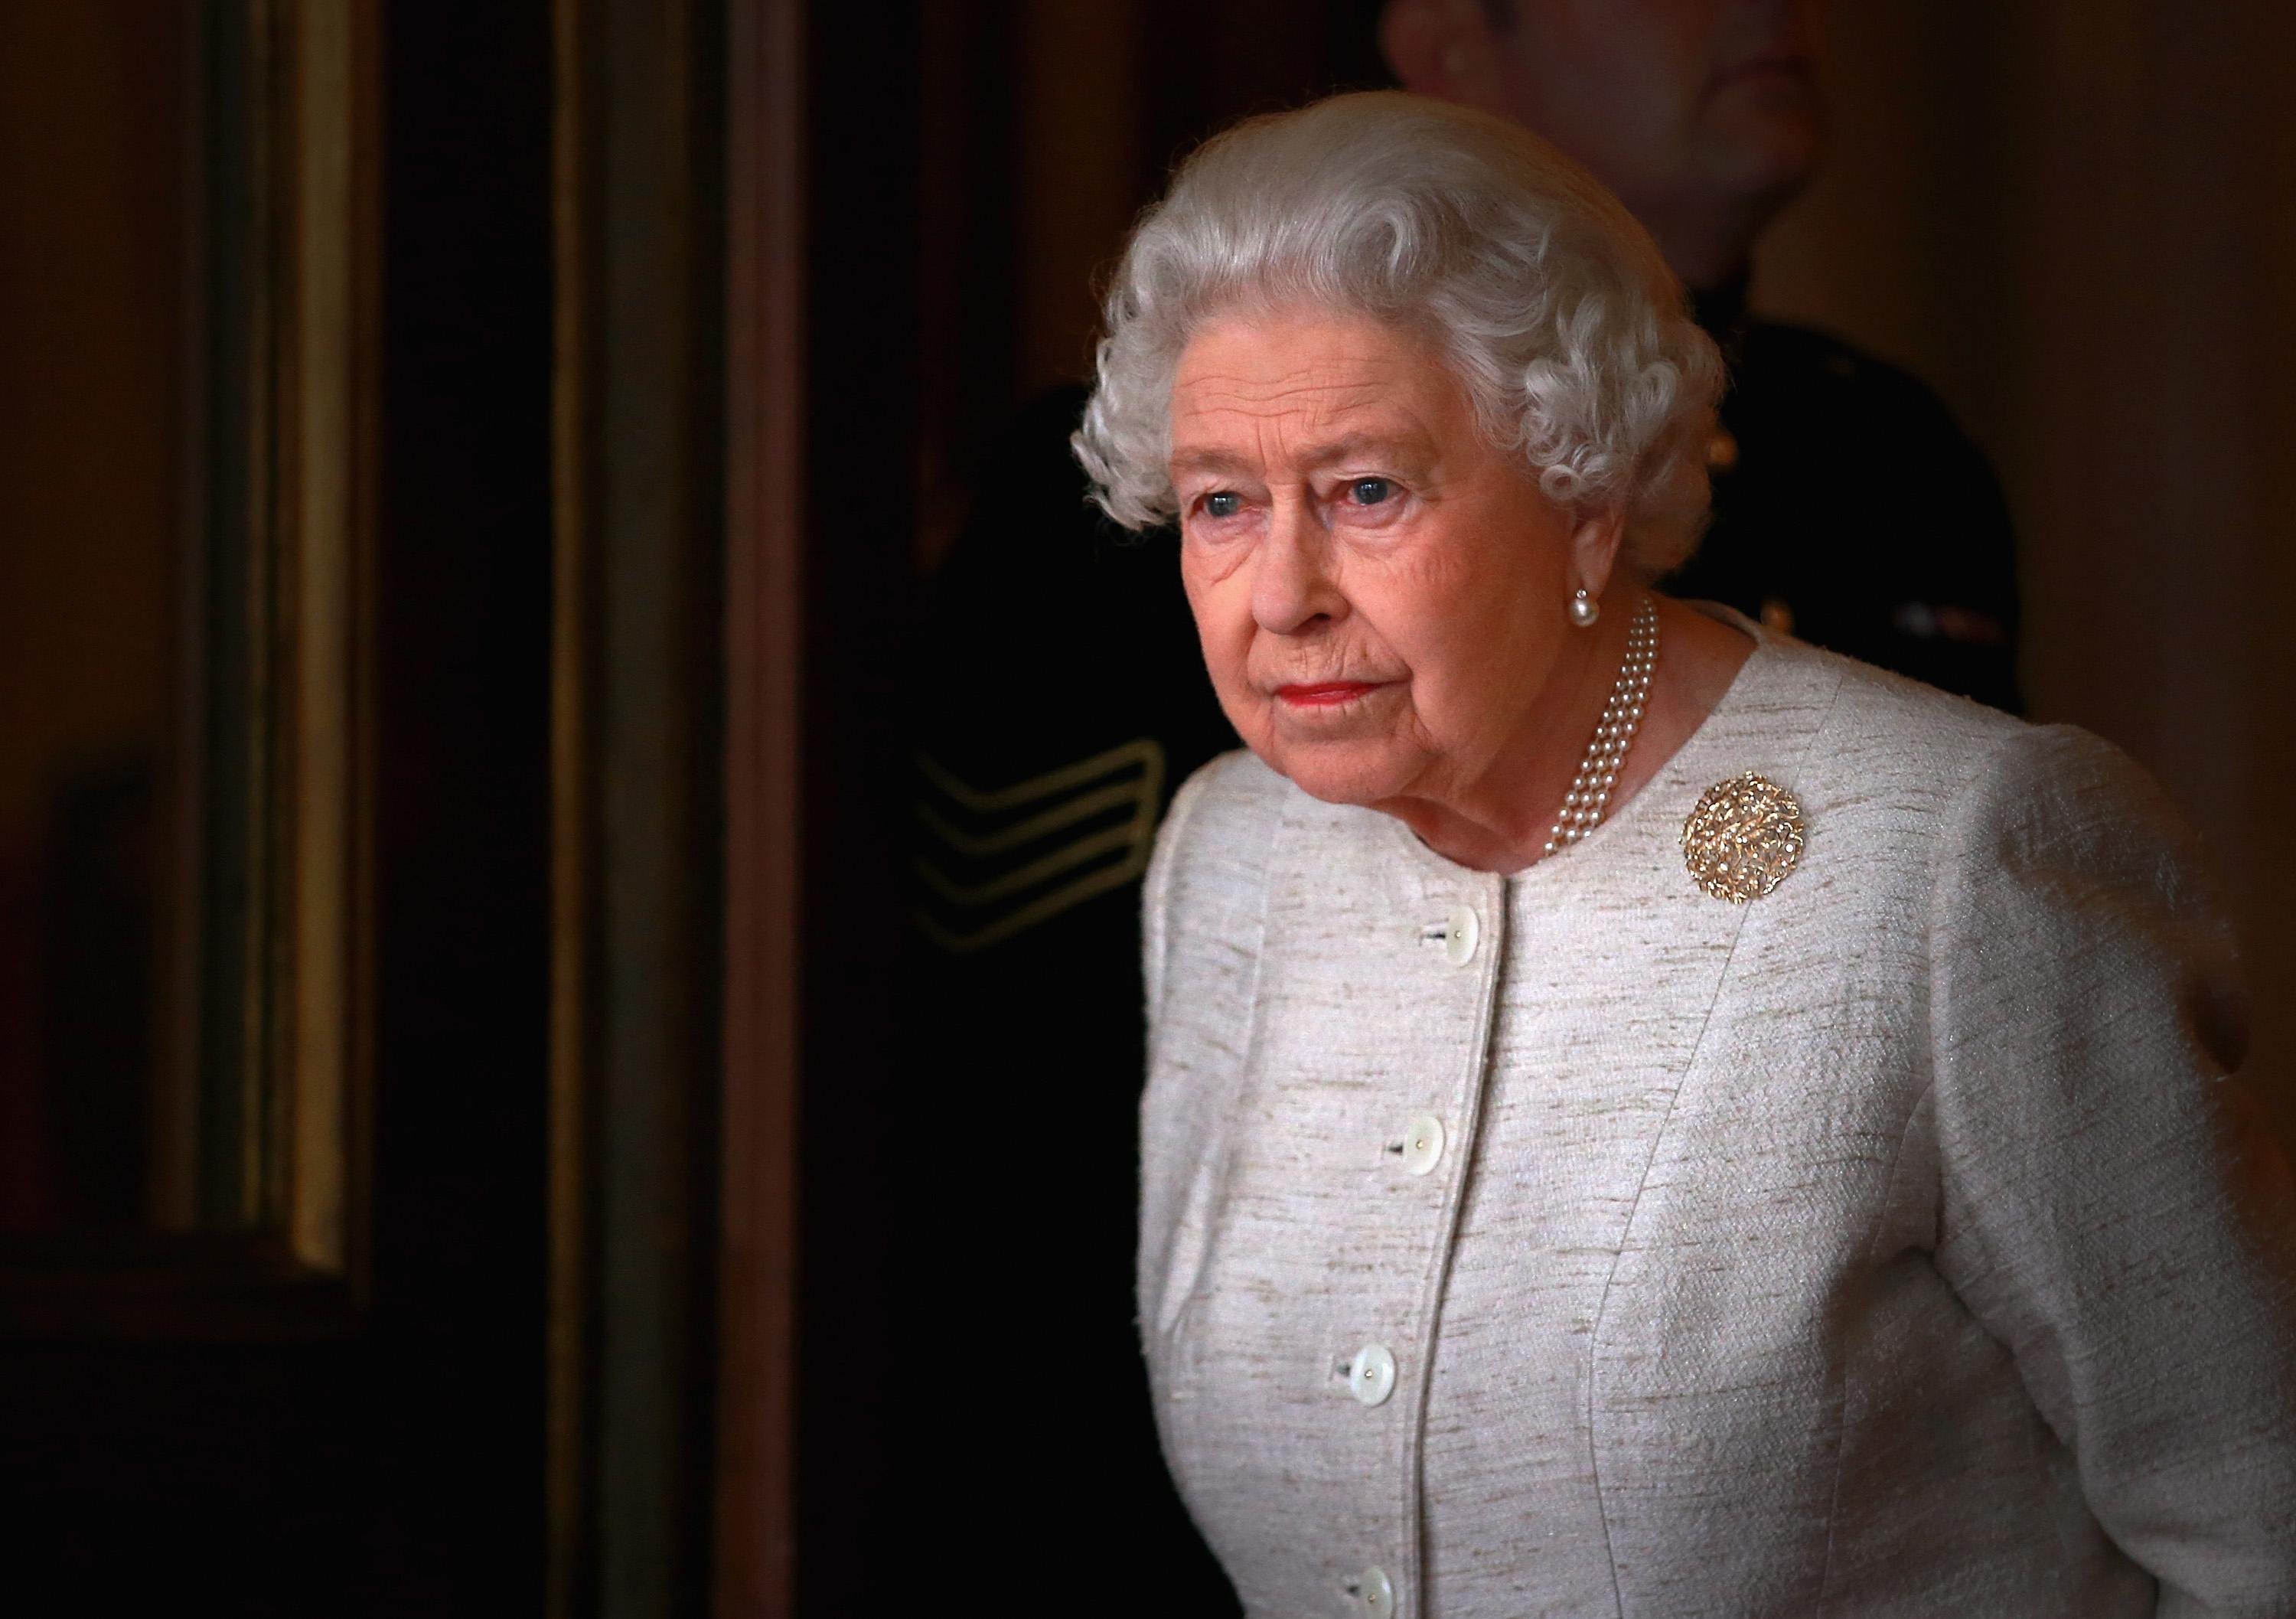 Former Buckingham Palace Doctor Reveals Royal Family Will Receive ‘Daily Medical Consultations’